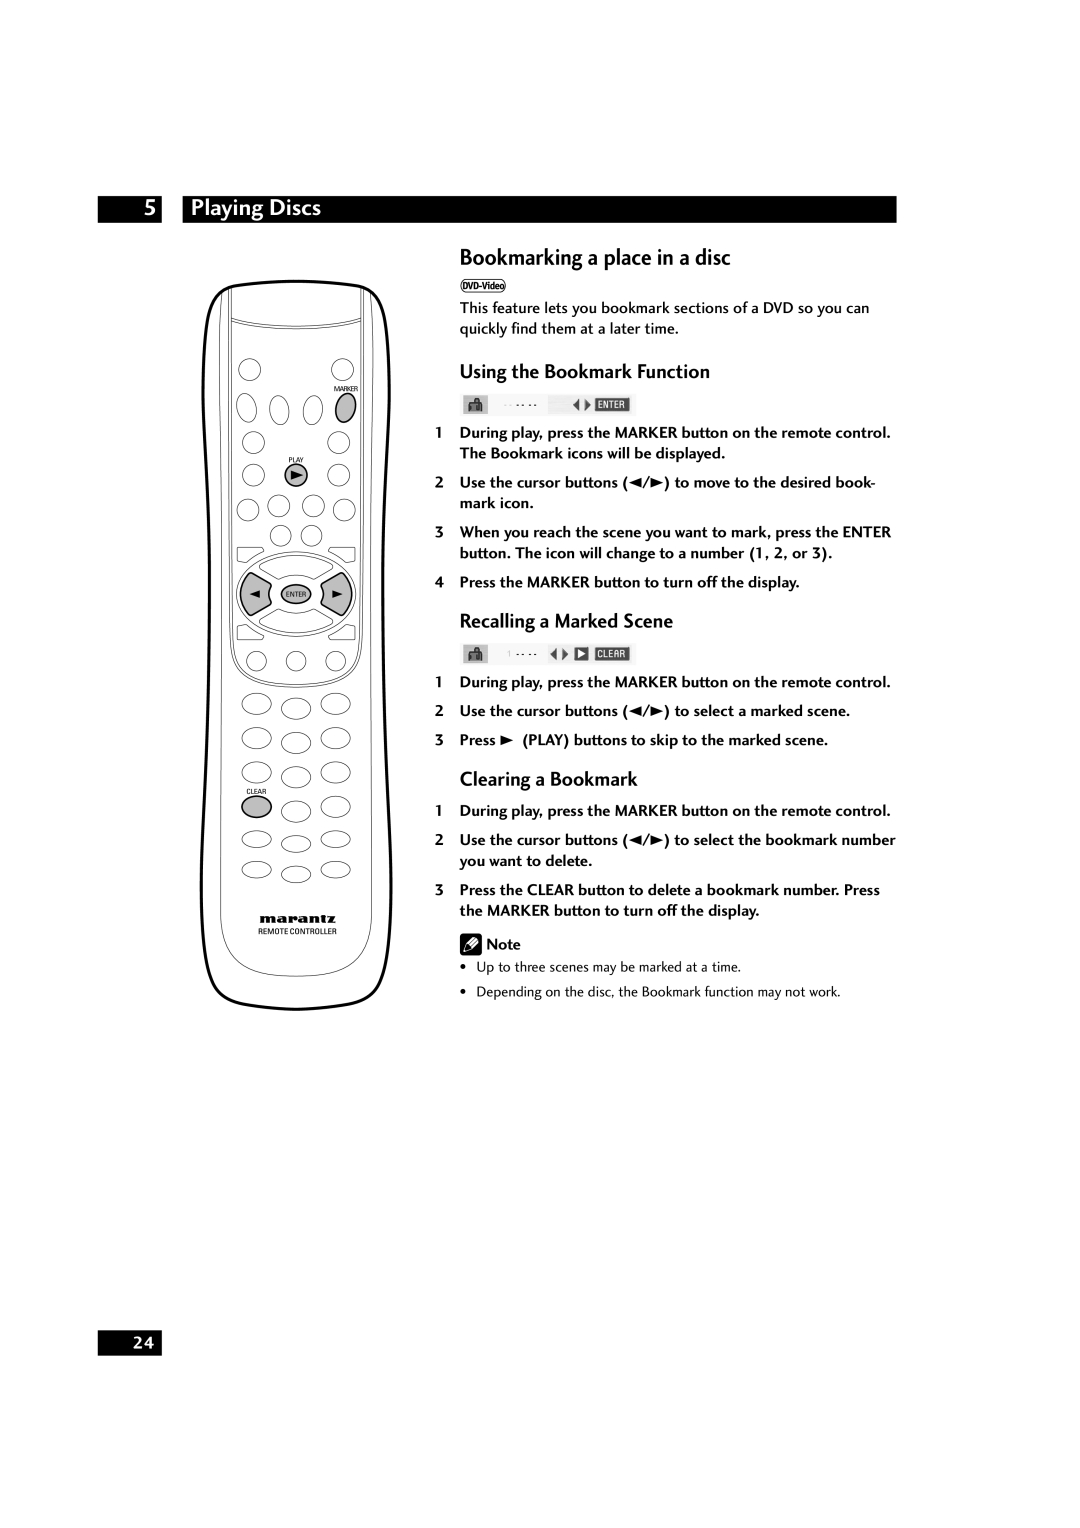 Marantz DV9600 Bookmarking a place in a disc, Using the Bookmark Function, Recalling a Marked Scene, Clearing a Bookmark 